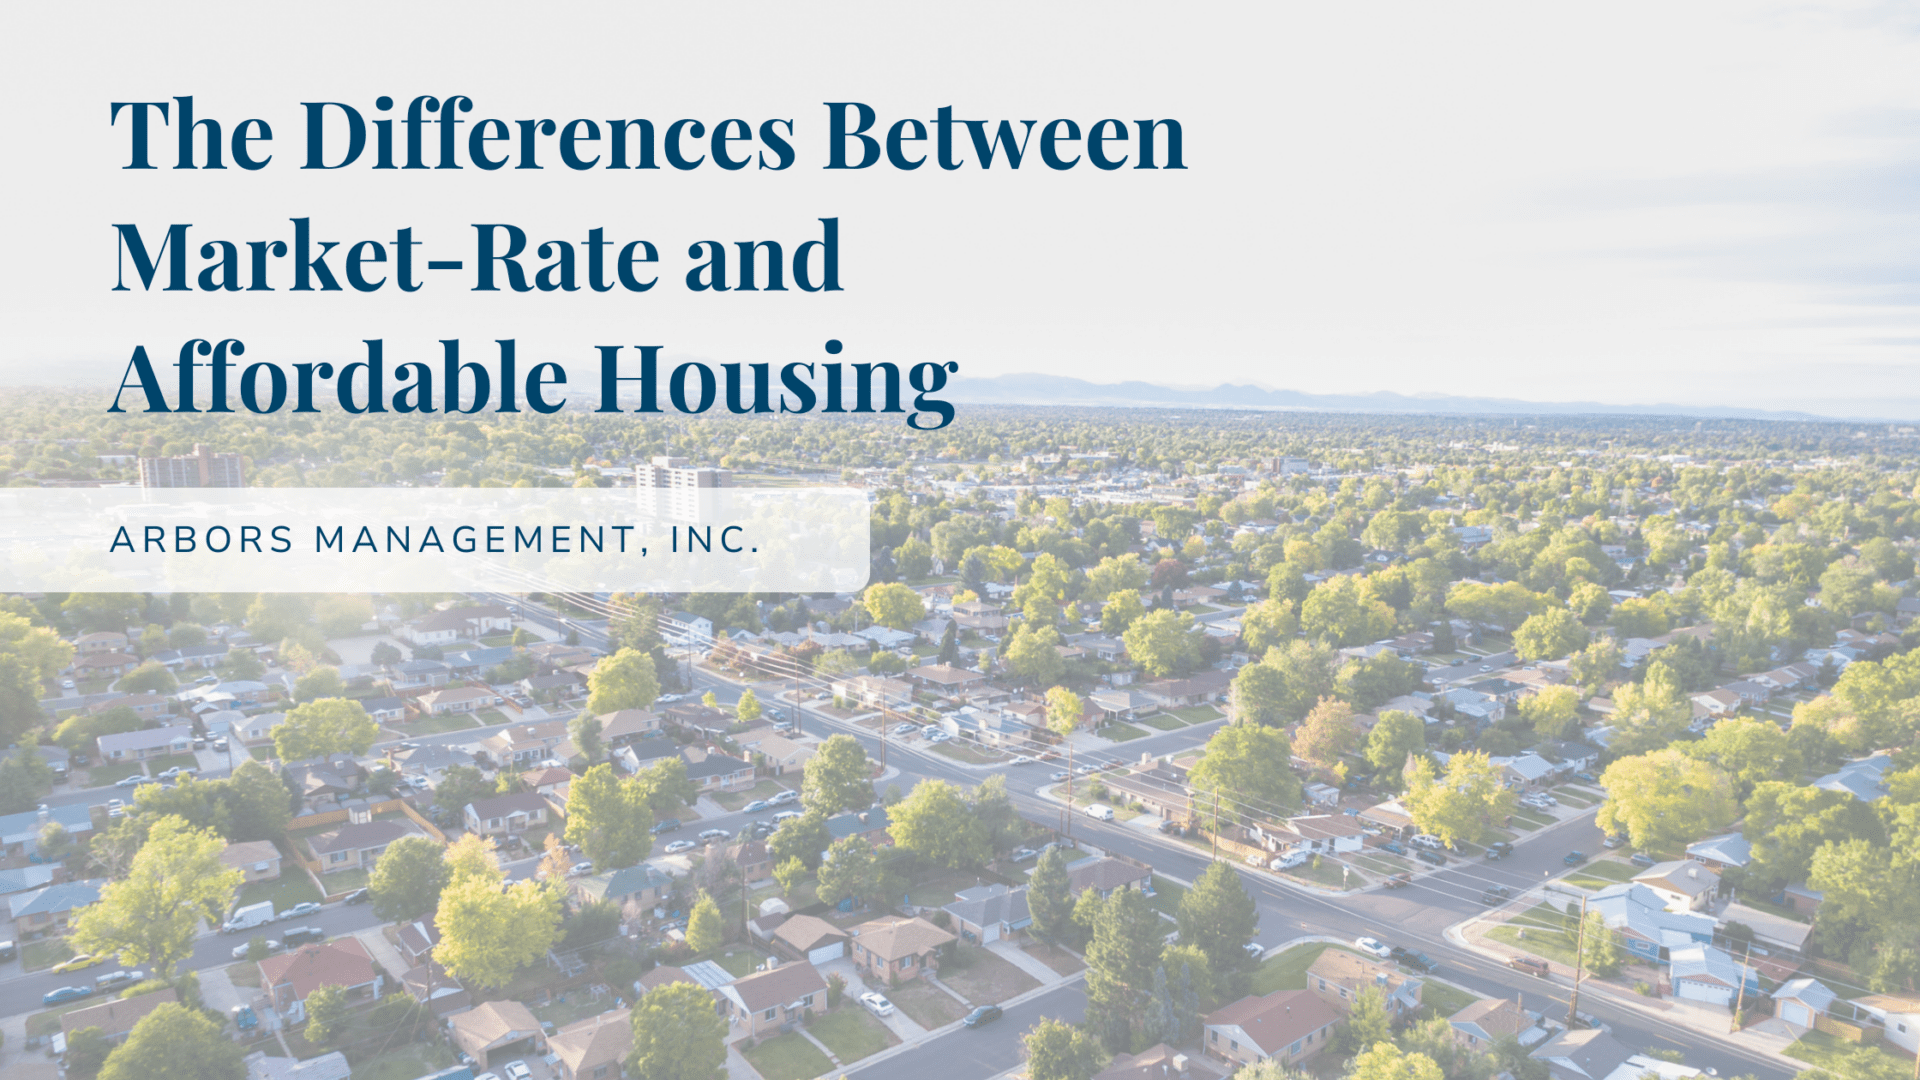 The Differences Between Market-Rate and Affordable Housing